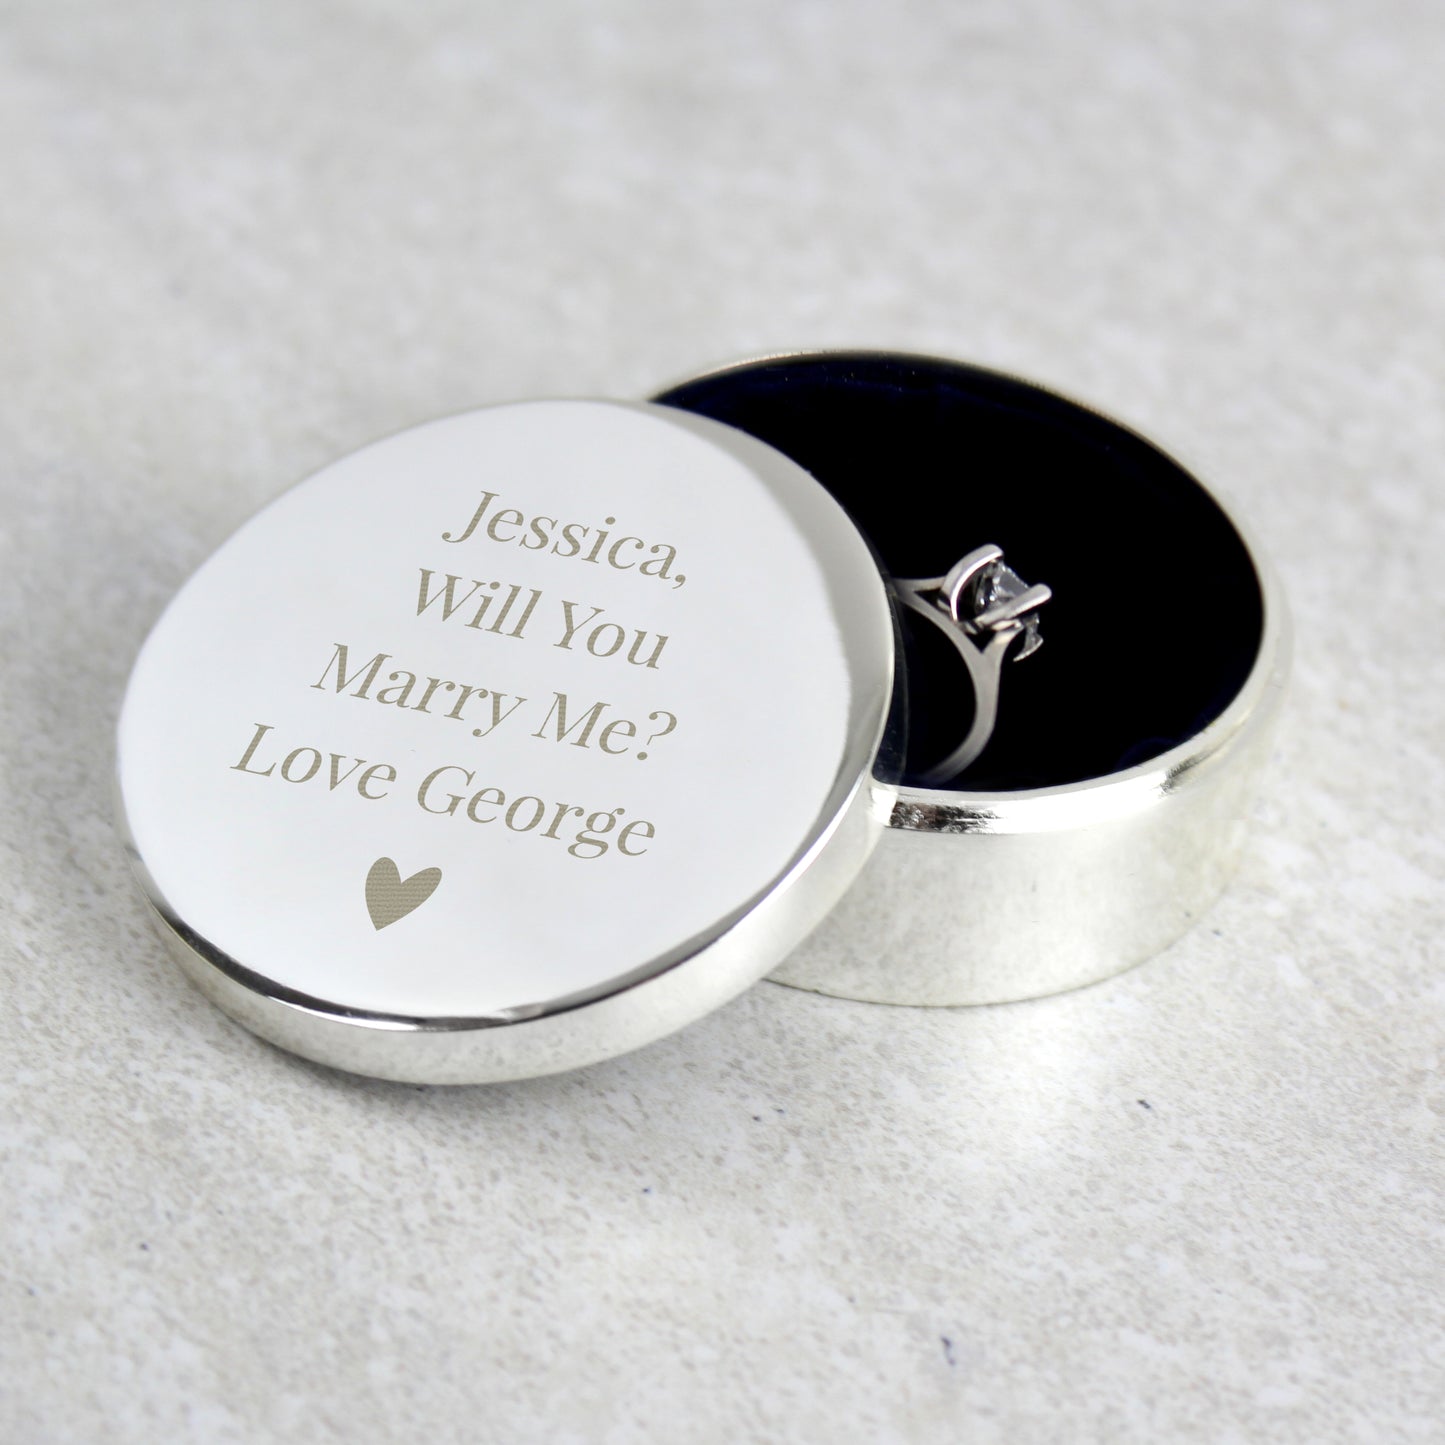 Personalised ring box with love heart carrying an engraved proposal